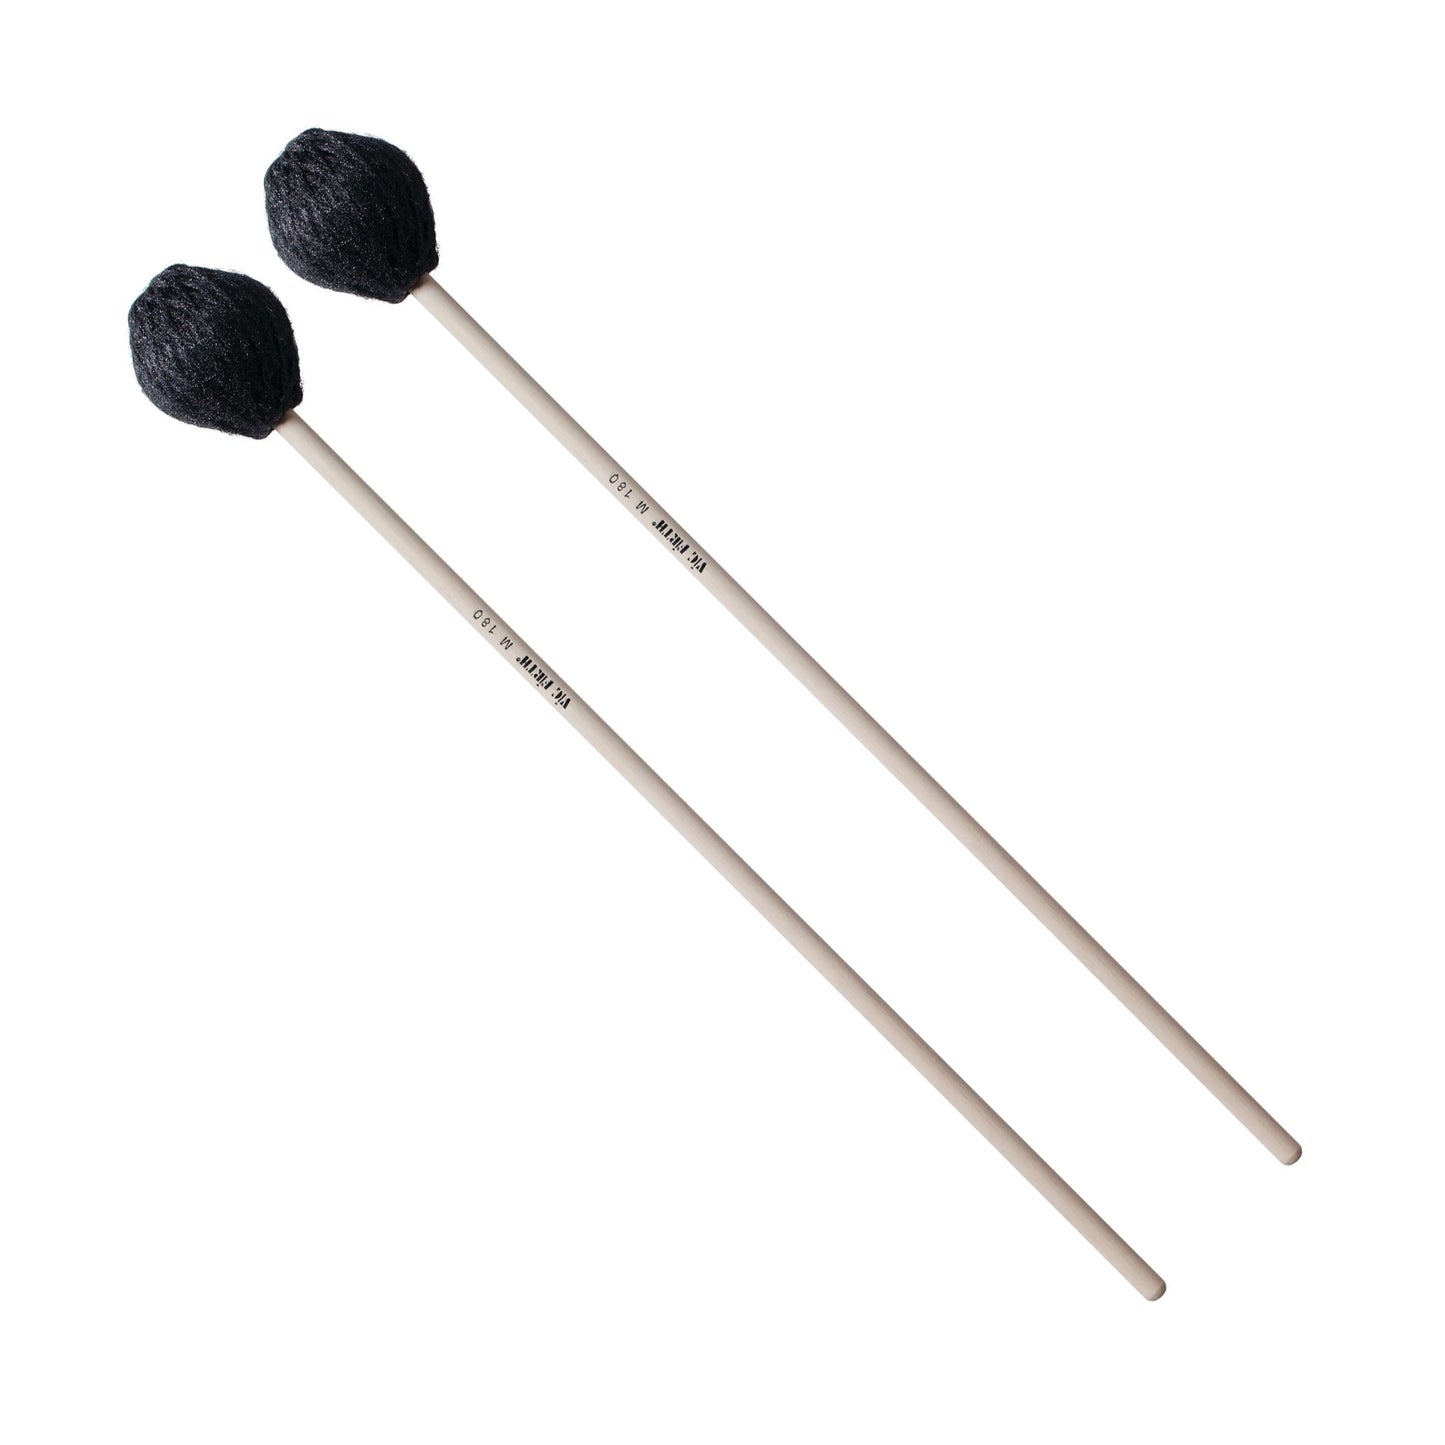 M180 - Corpsmaster Multi-Application Series - Soft, Synthetic Core Mallets